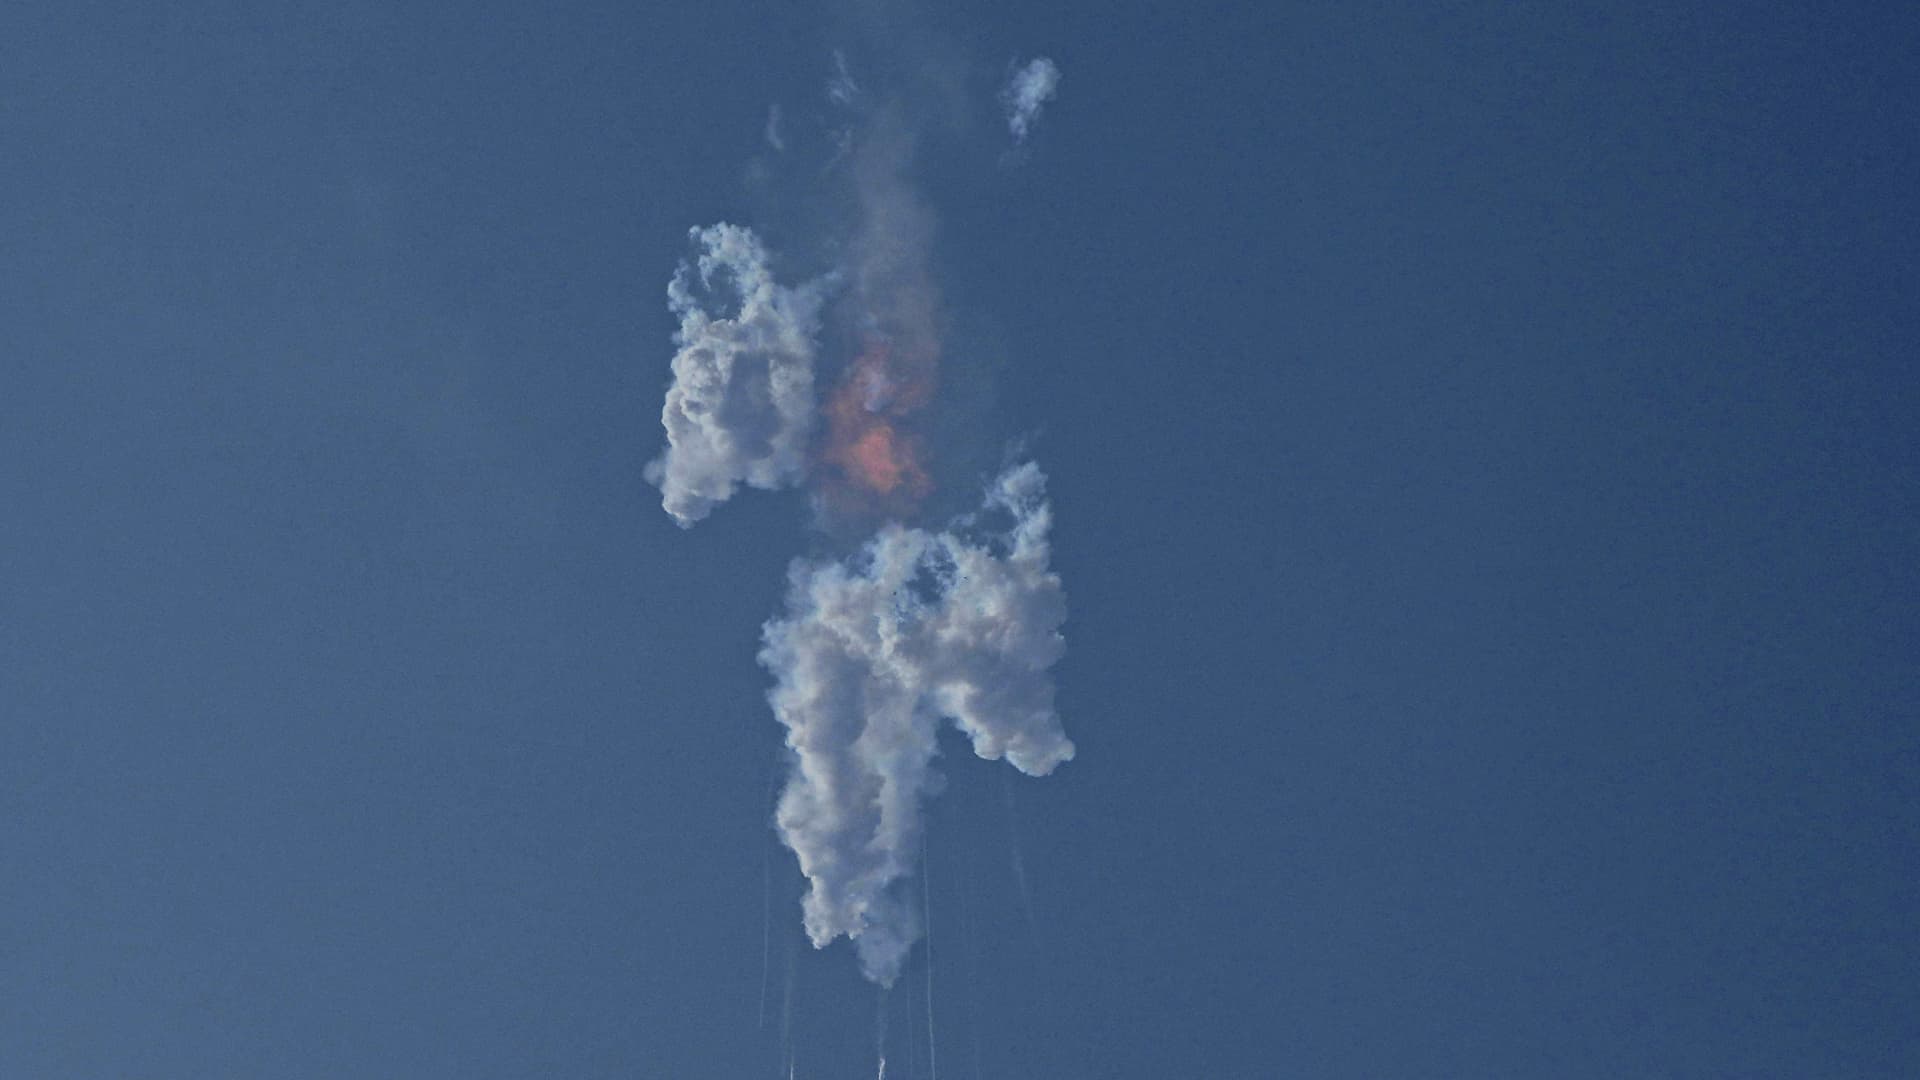 SpaceX's Starship launches from Starbase in Boca Chica, Texas, Thursday, April 20, 2023. The giant new rocket exploded minutes after blasting off on it first test flight and crashed into the Gulf of Mexico.